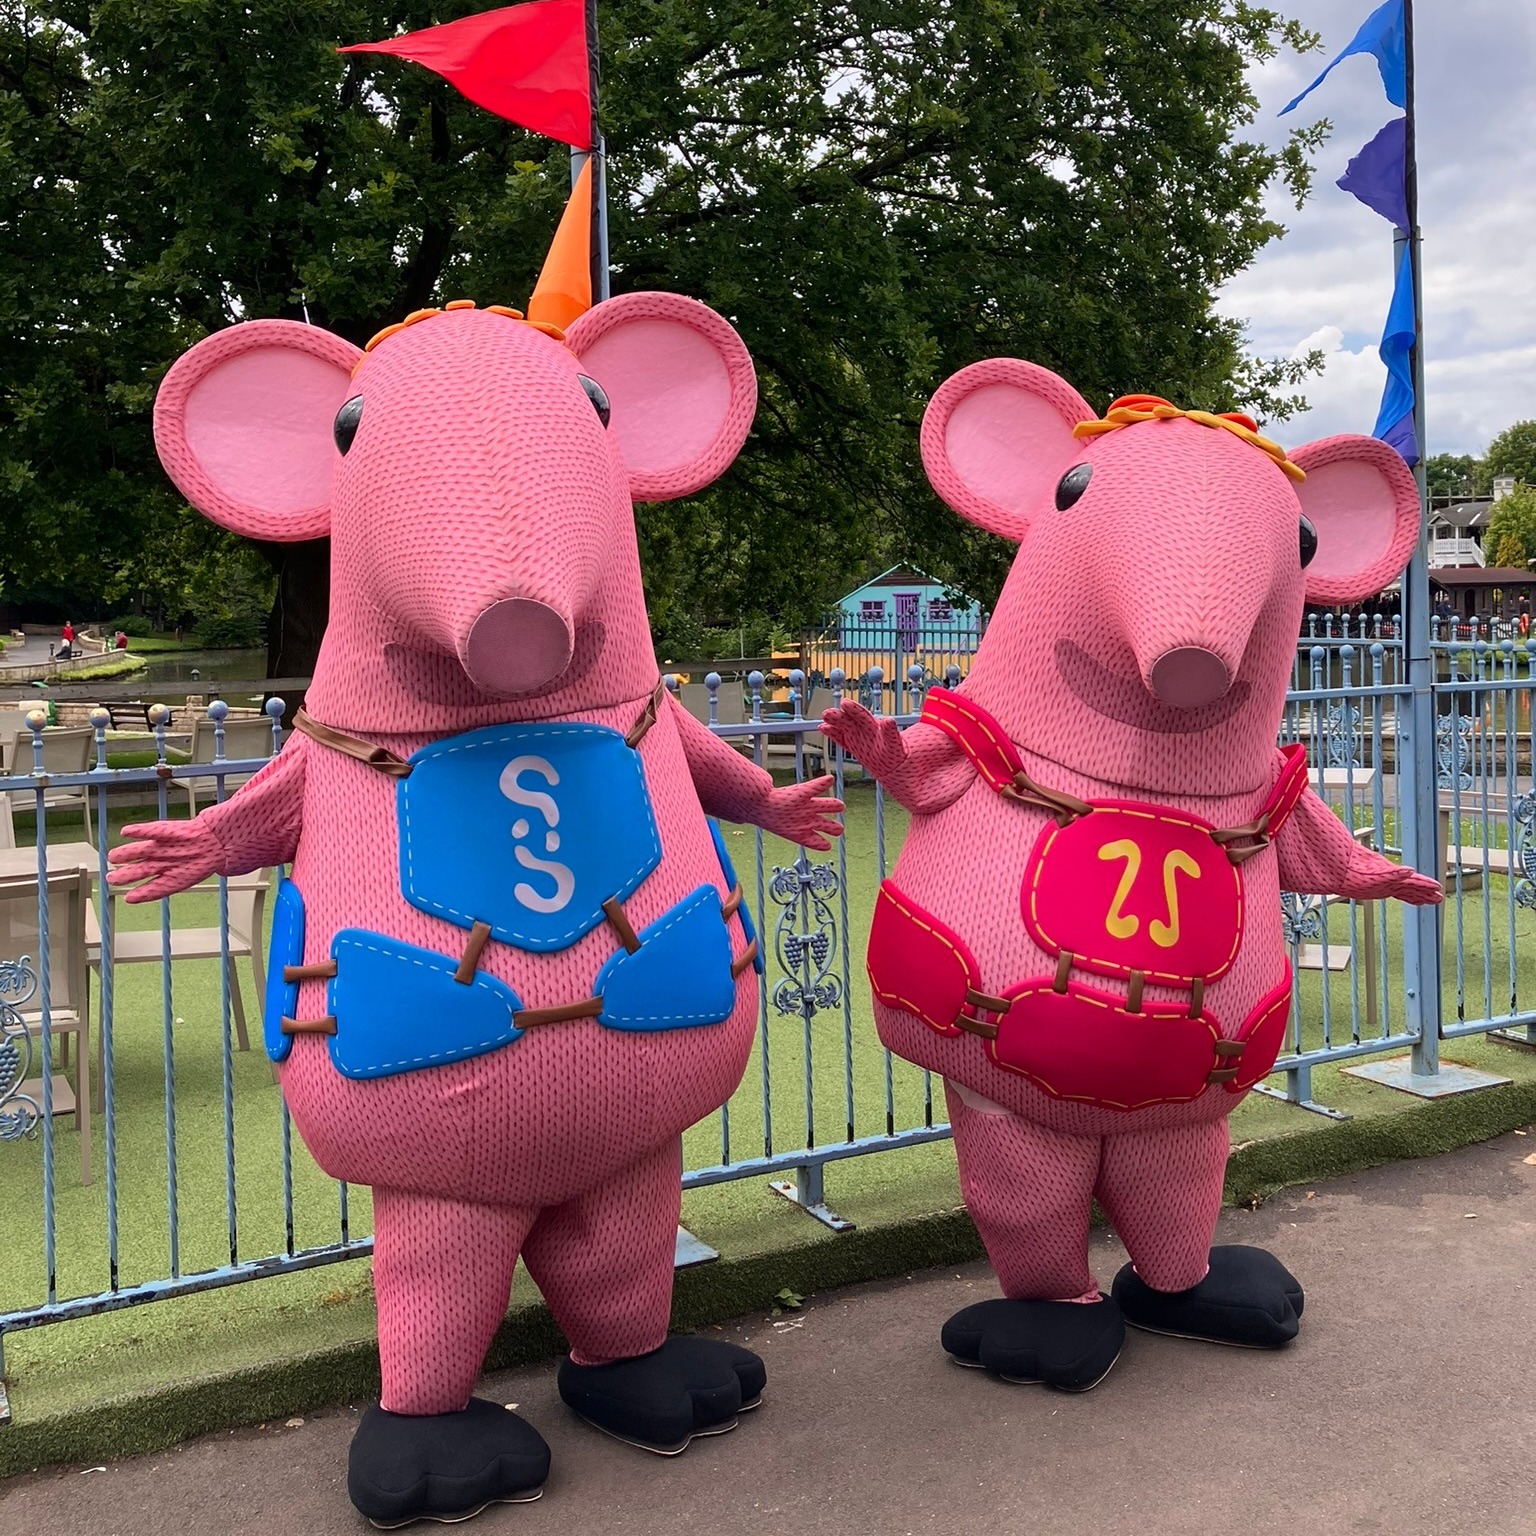 Tiny and Small from The Clangers at Gulliver’s.